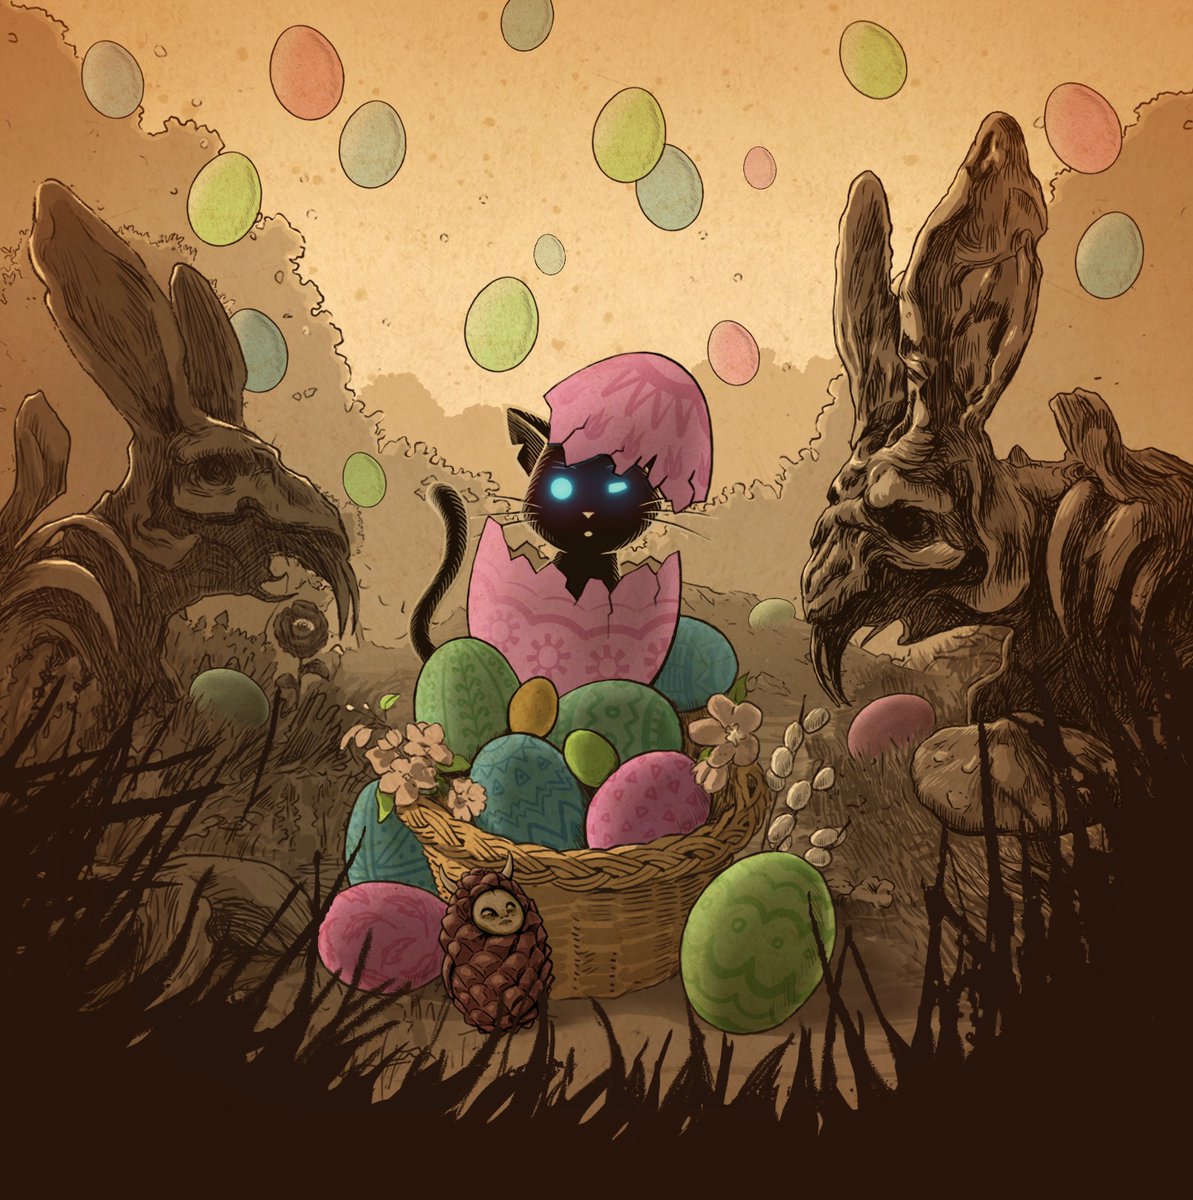 Too gloomy of an Easter card? We don’t think so. You’ve got bunnies, just like the chocolate ones. Eat as many treats as you like, my dears. Baba the Witch likes chubby children.

#eastermagic #eastervibes